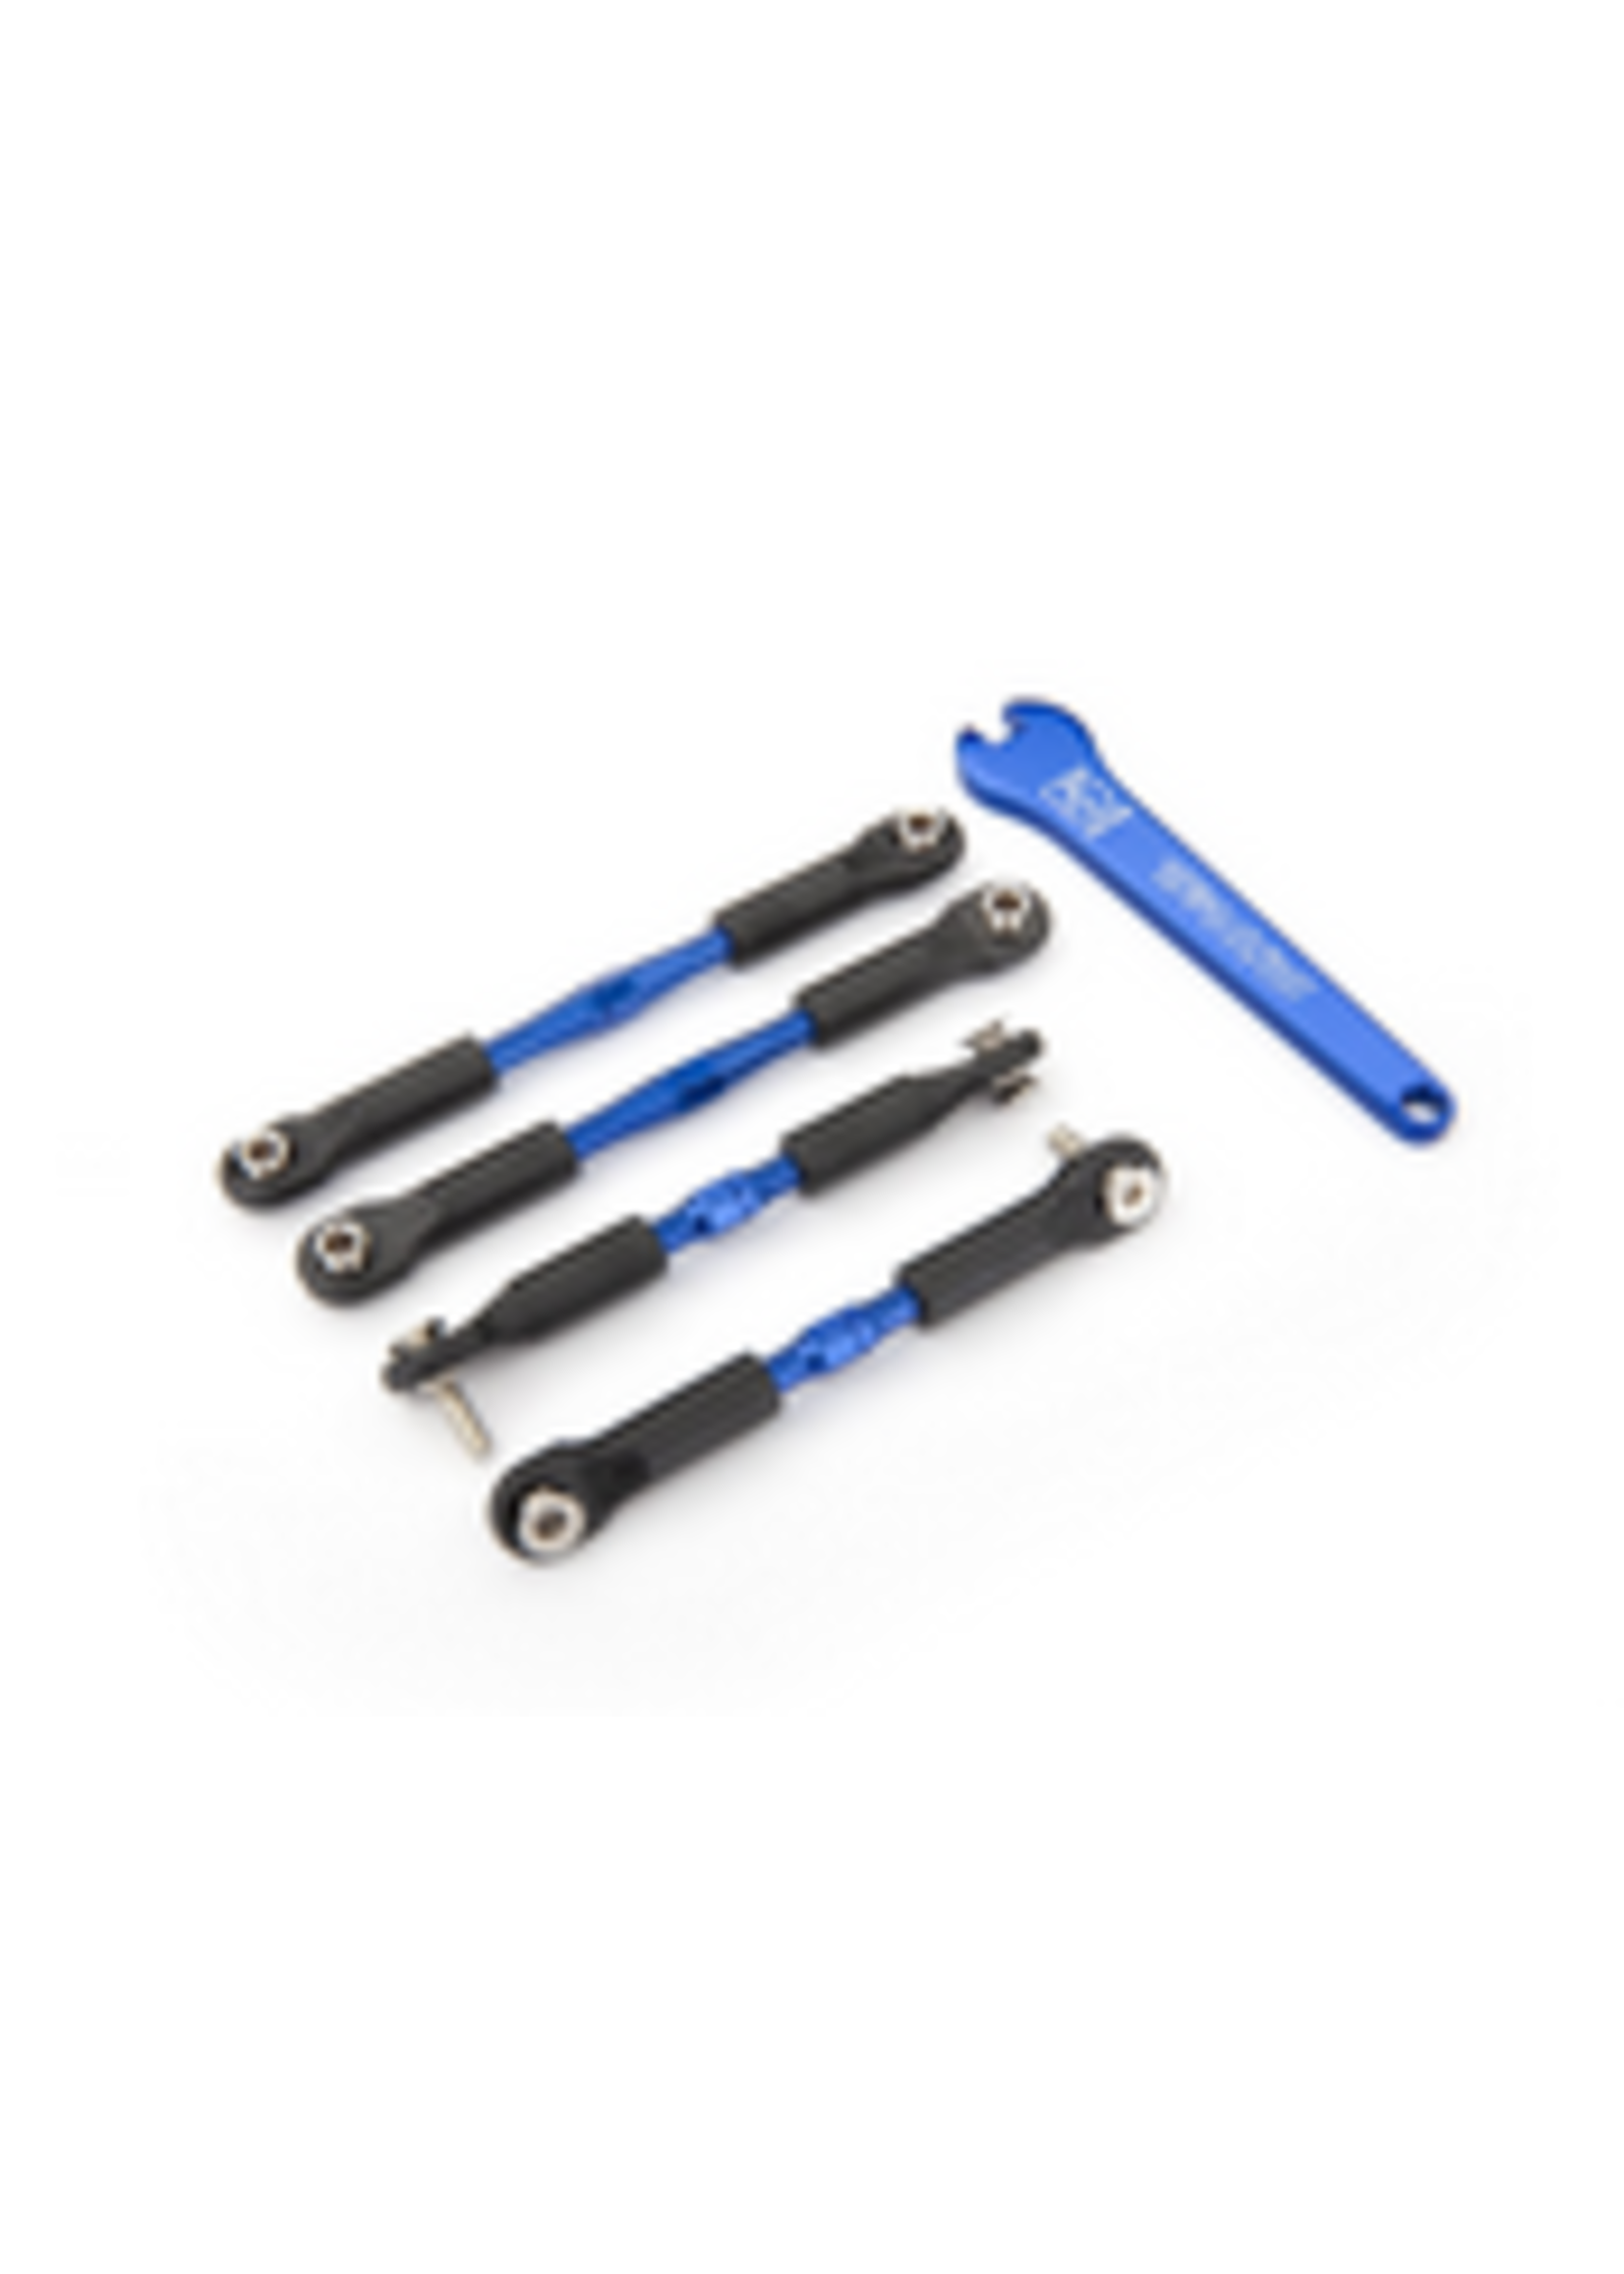 Traxxas TRA3741A Traxxas Turnbuckles, aluminum (blue-anodized), camber links, front, 39mm (2), rear, 49mm (2) (assembled w/rod ends & hollow balls)/ wrench